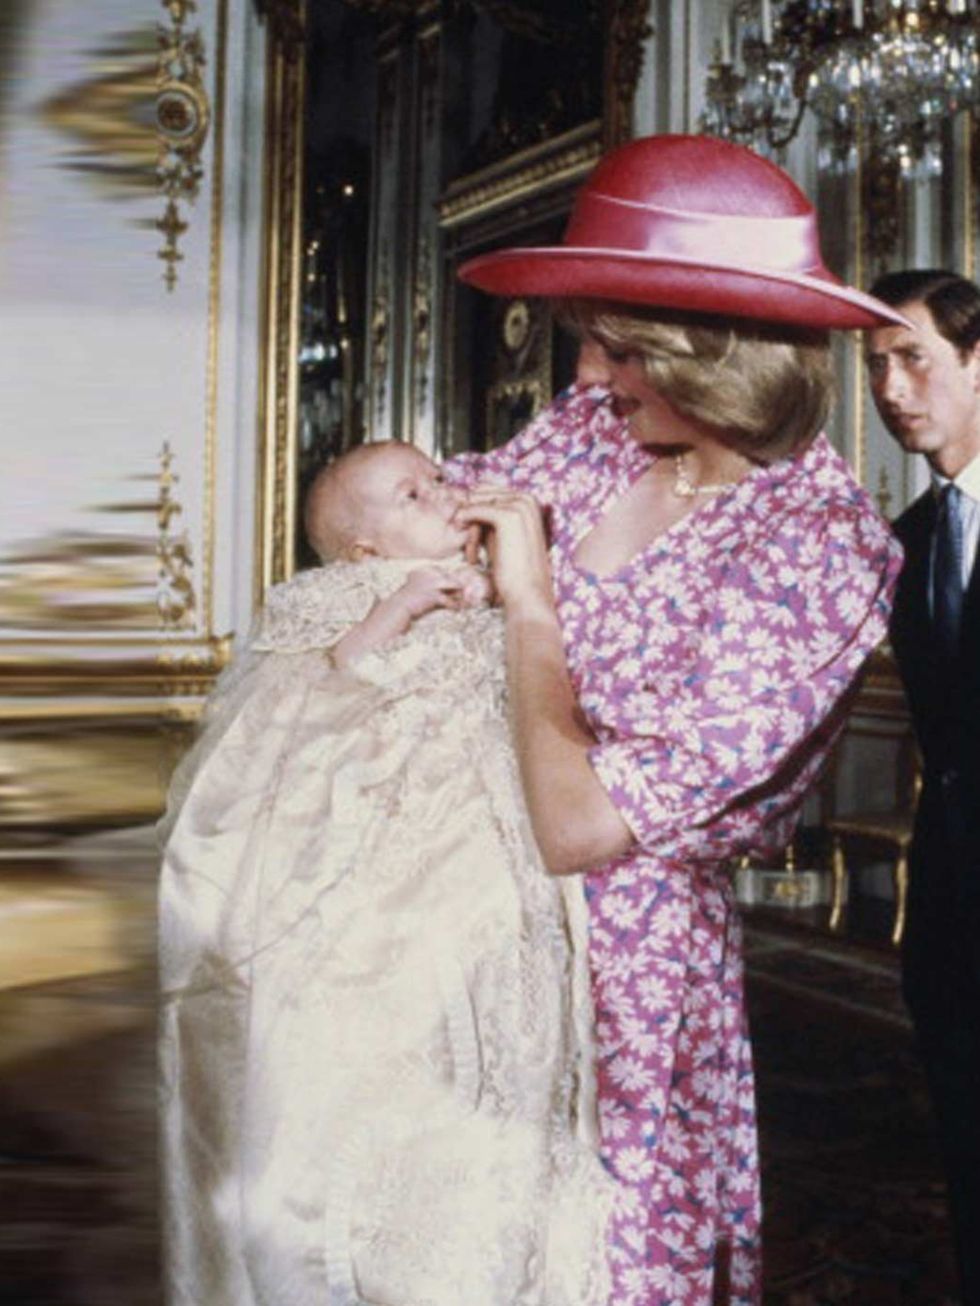 <p>Diana, Princess of Wales (1961-1997) and Prince Charles with Prince William on the day of William's christening, held in the music room of Buckingham Palace August 4 1982.</p><p><em><a href="http://www.elleuk.com/style/occasions/royal-baby-facts">Royal